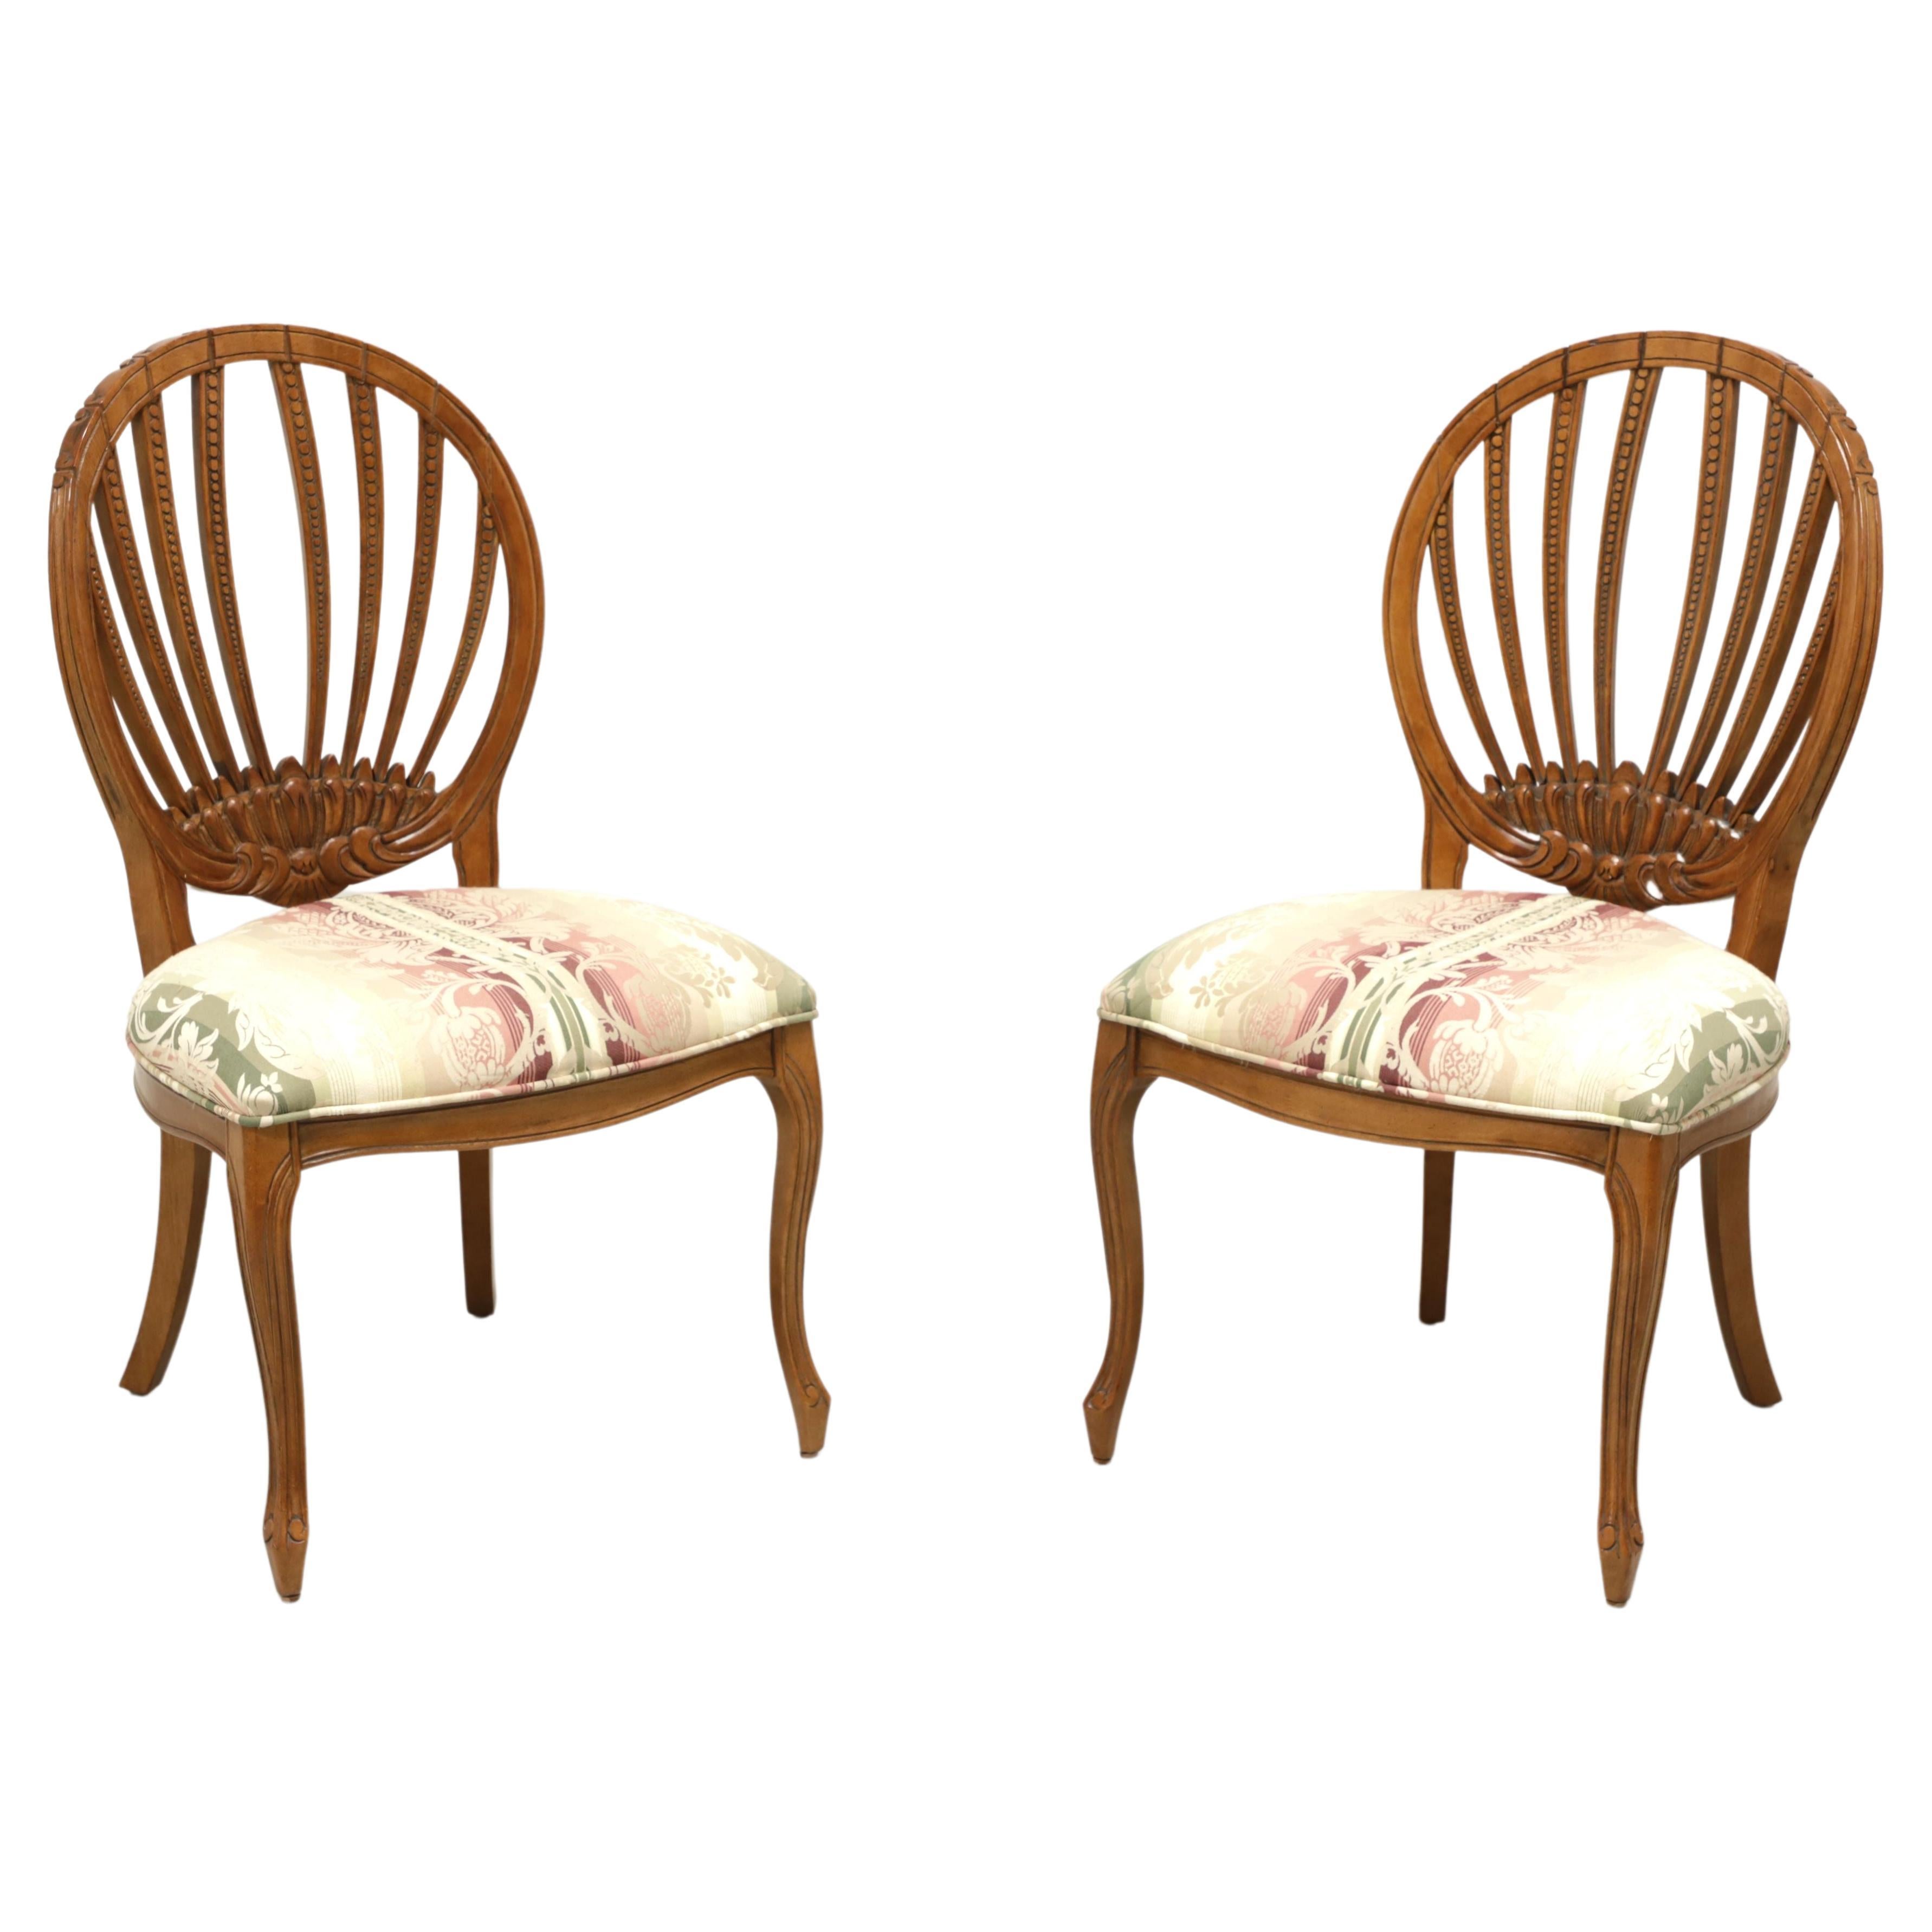 CENTURY French Country Oval Back Dining Side Chairs - Pair